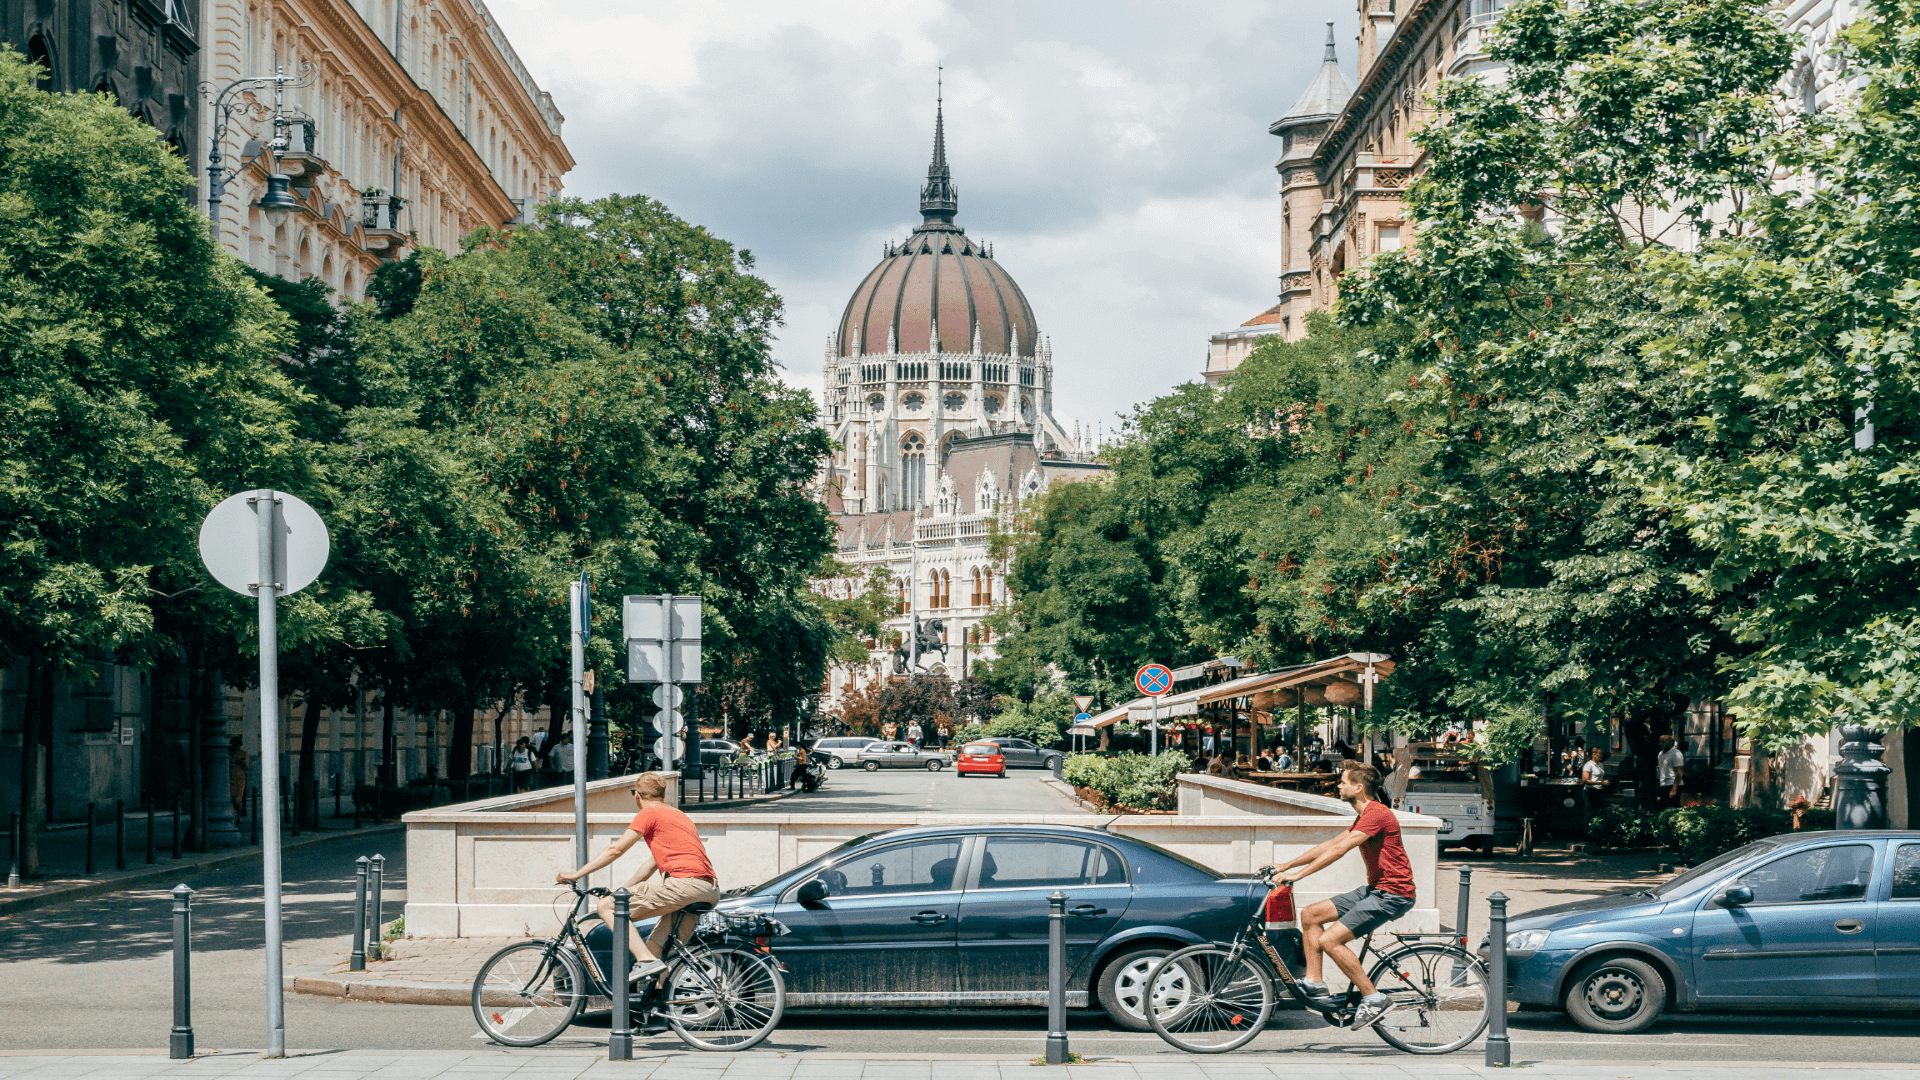 Cyclists in the city of Budapest, Hungary